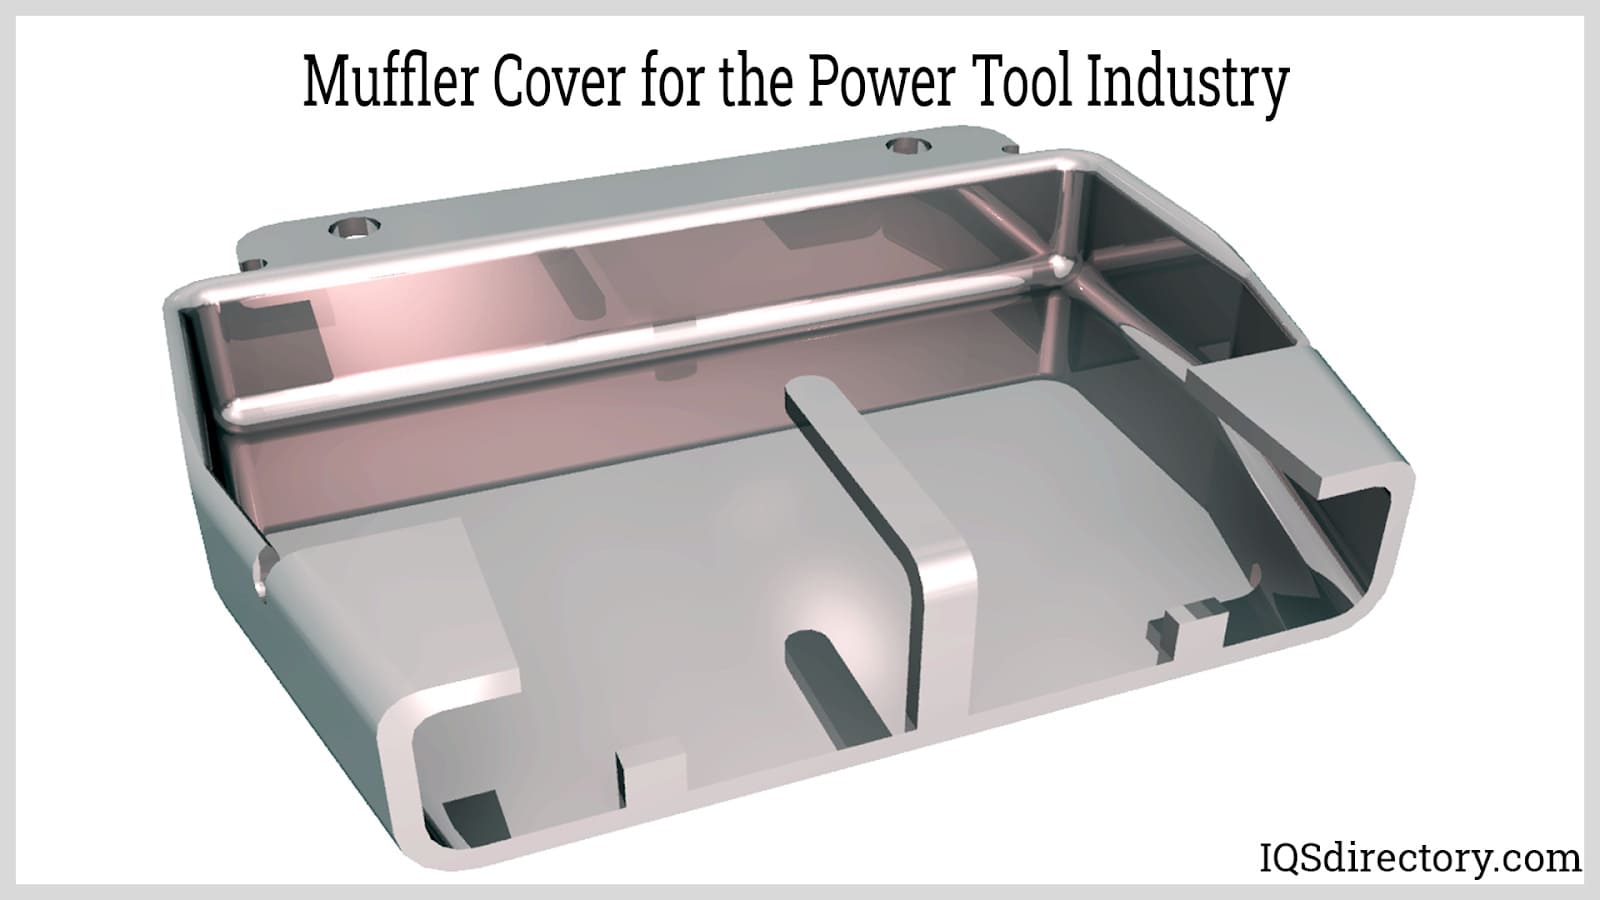 Muffler Cover for the Power Tool Industry